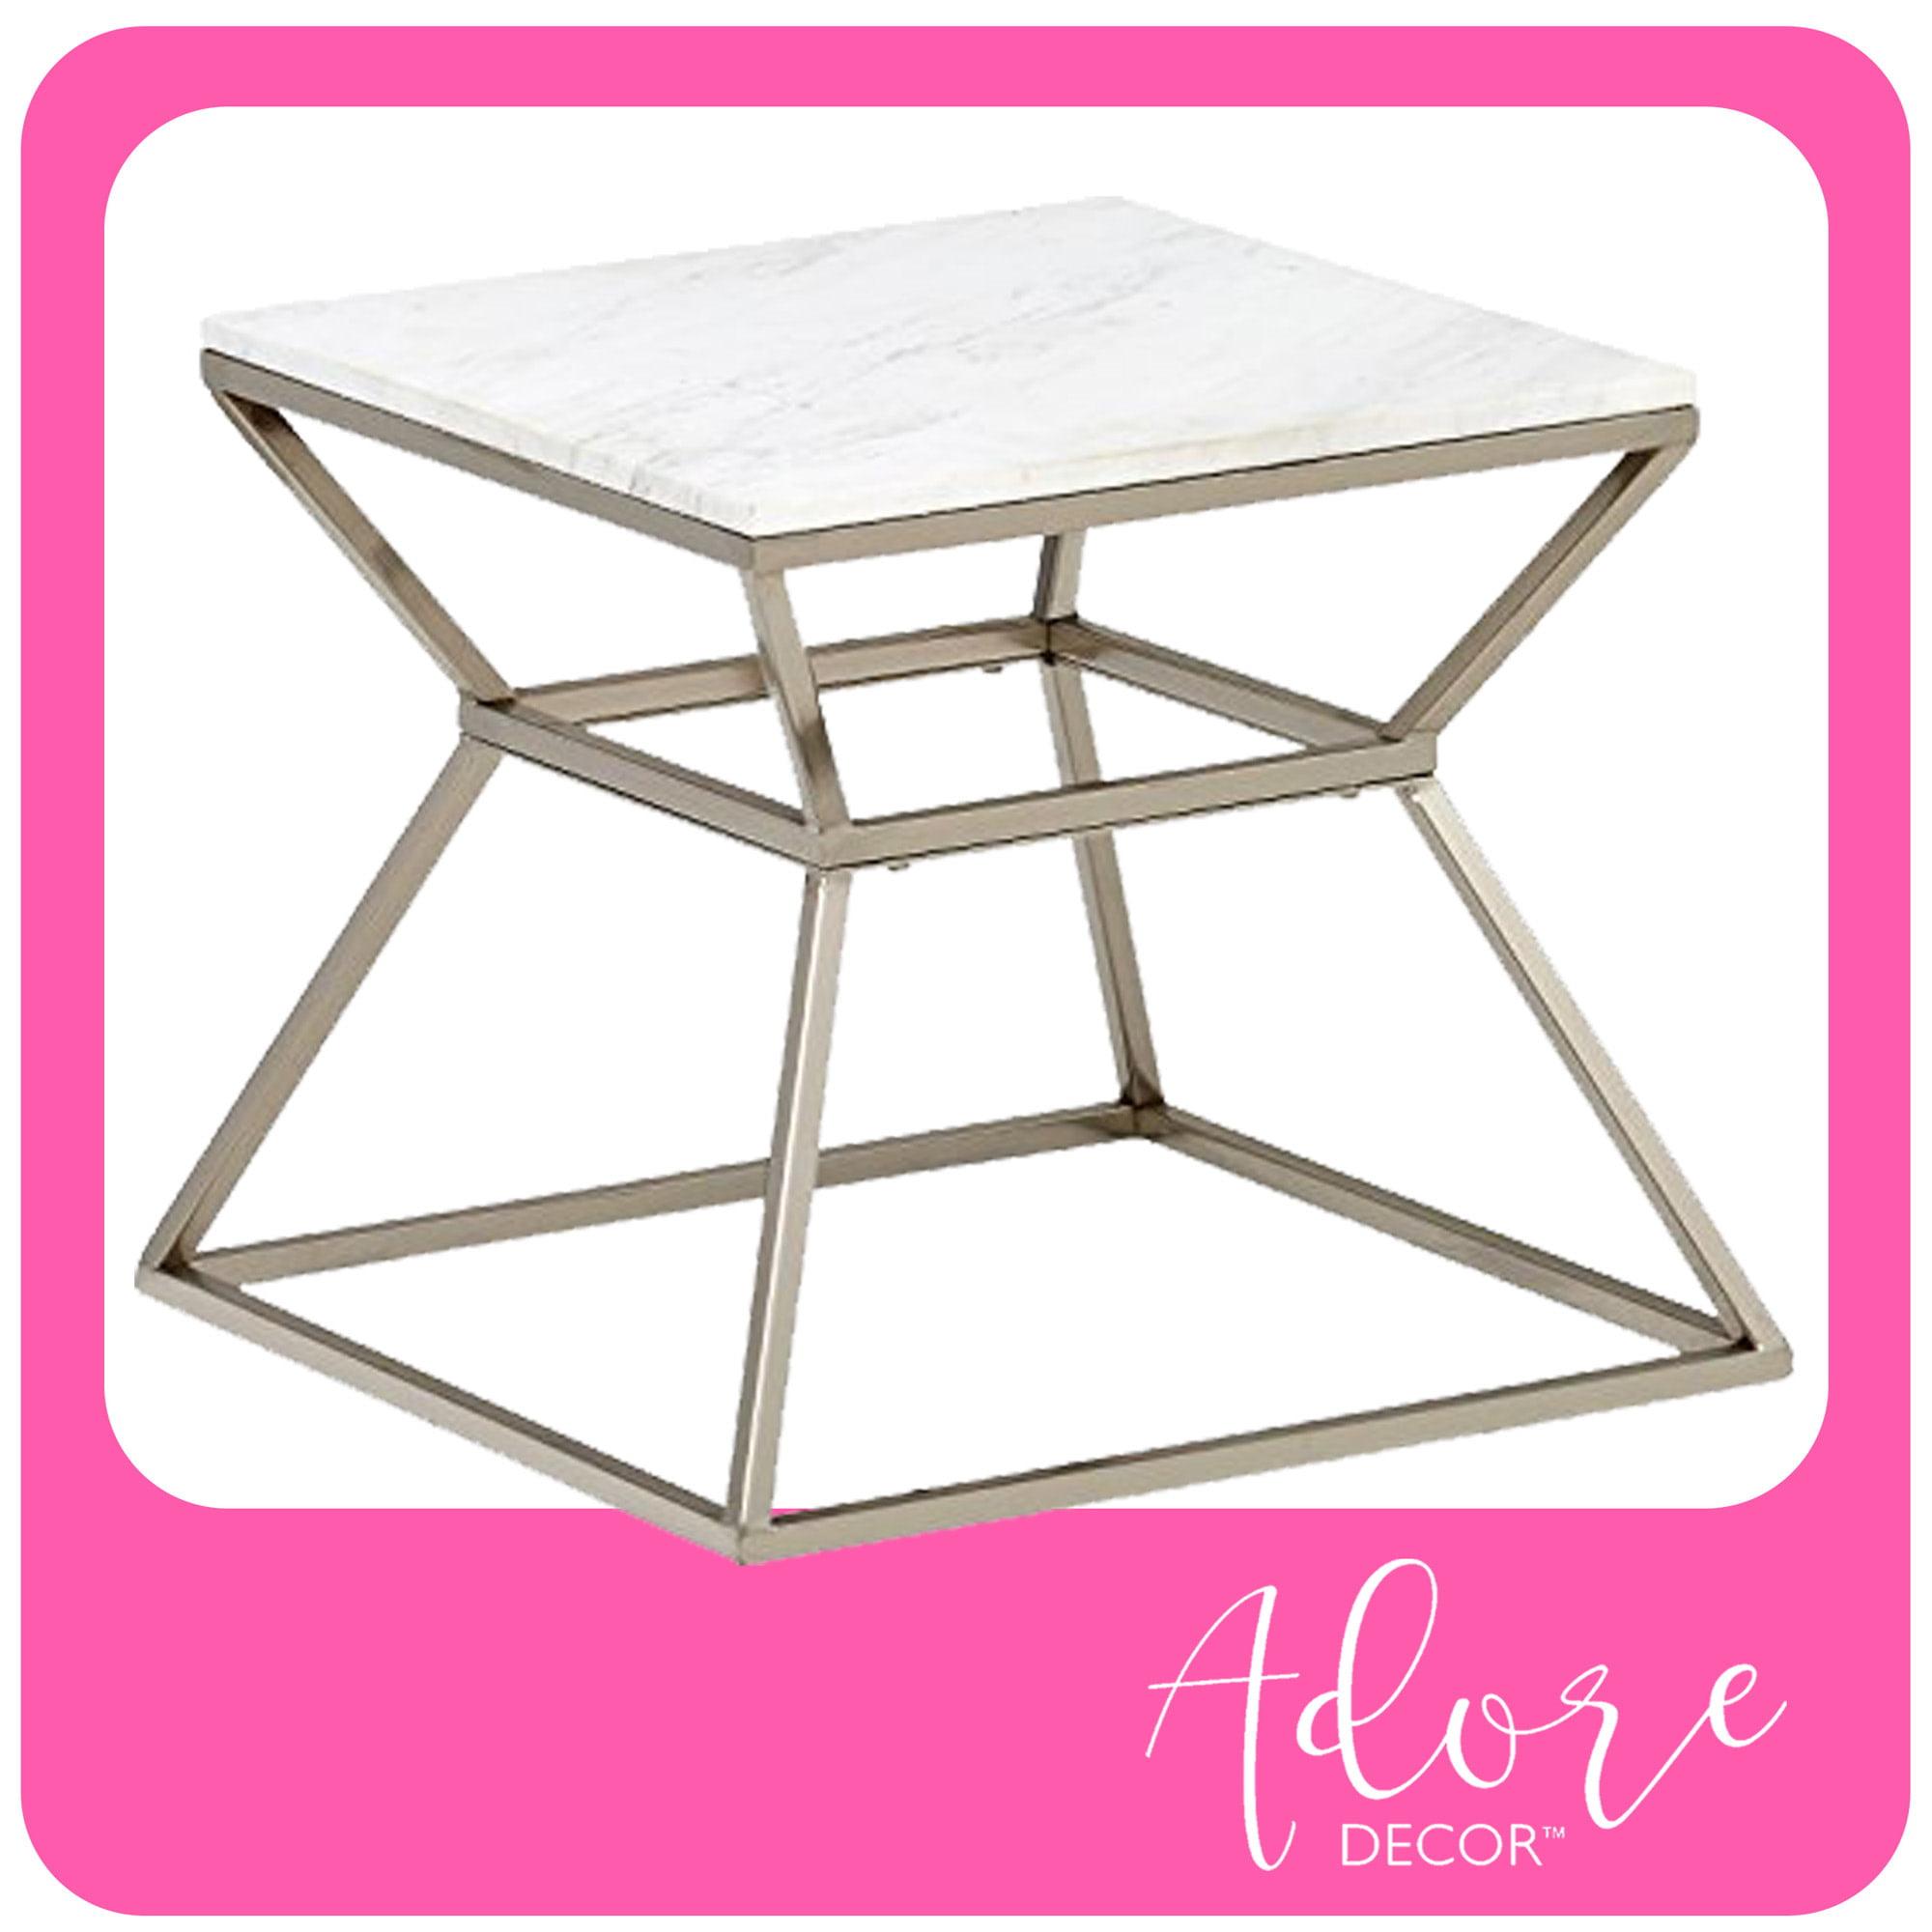 Art Deco Inspired Silver and White Marble Square Side Table